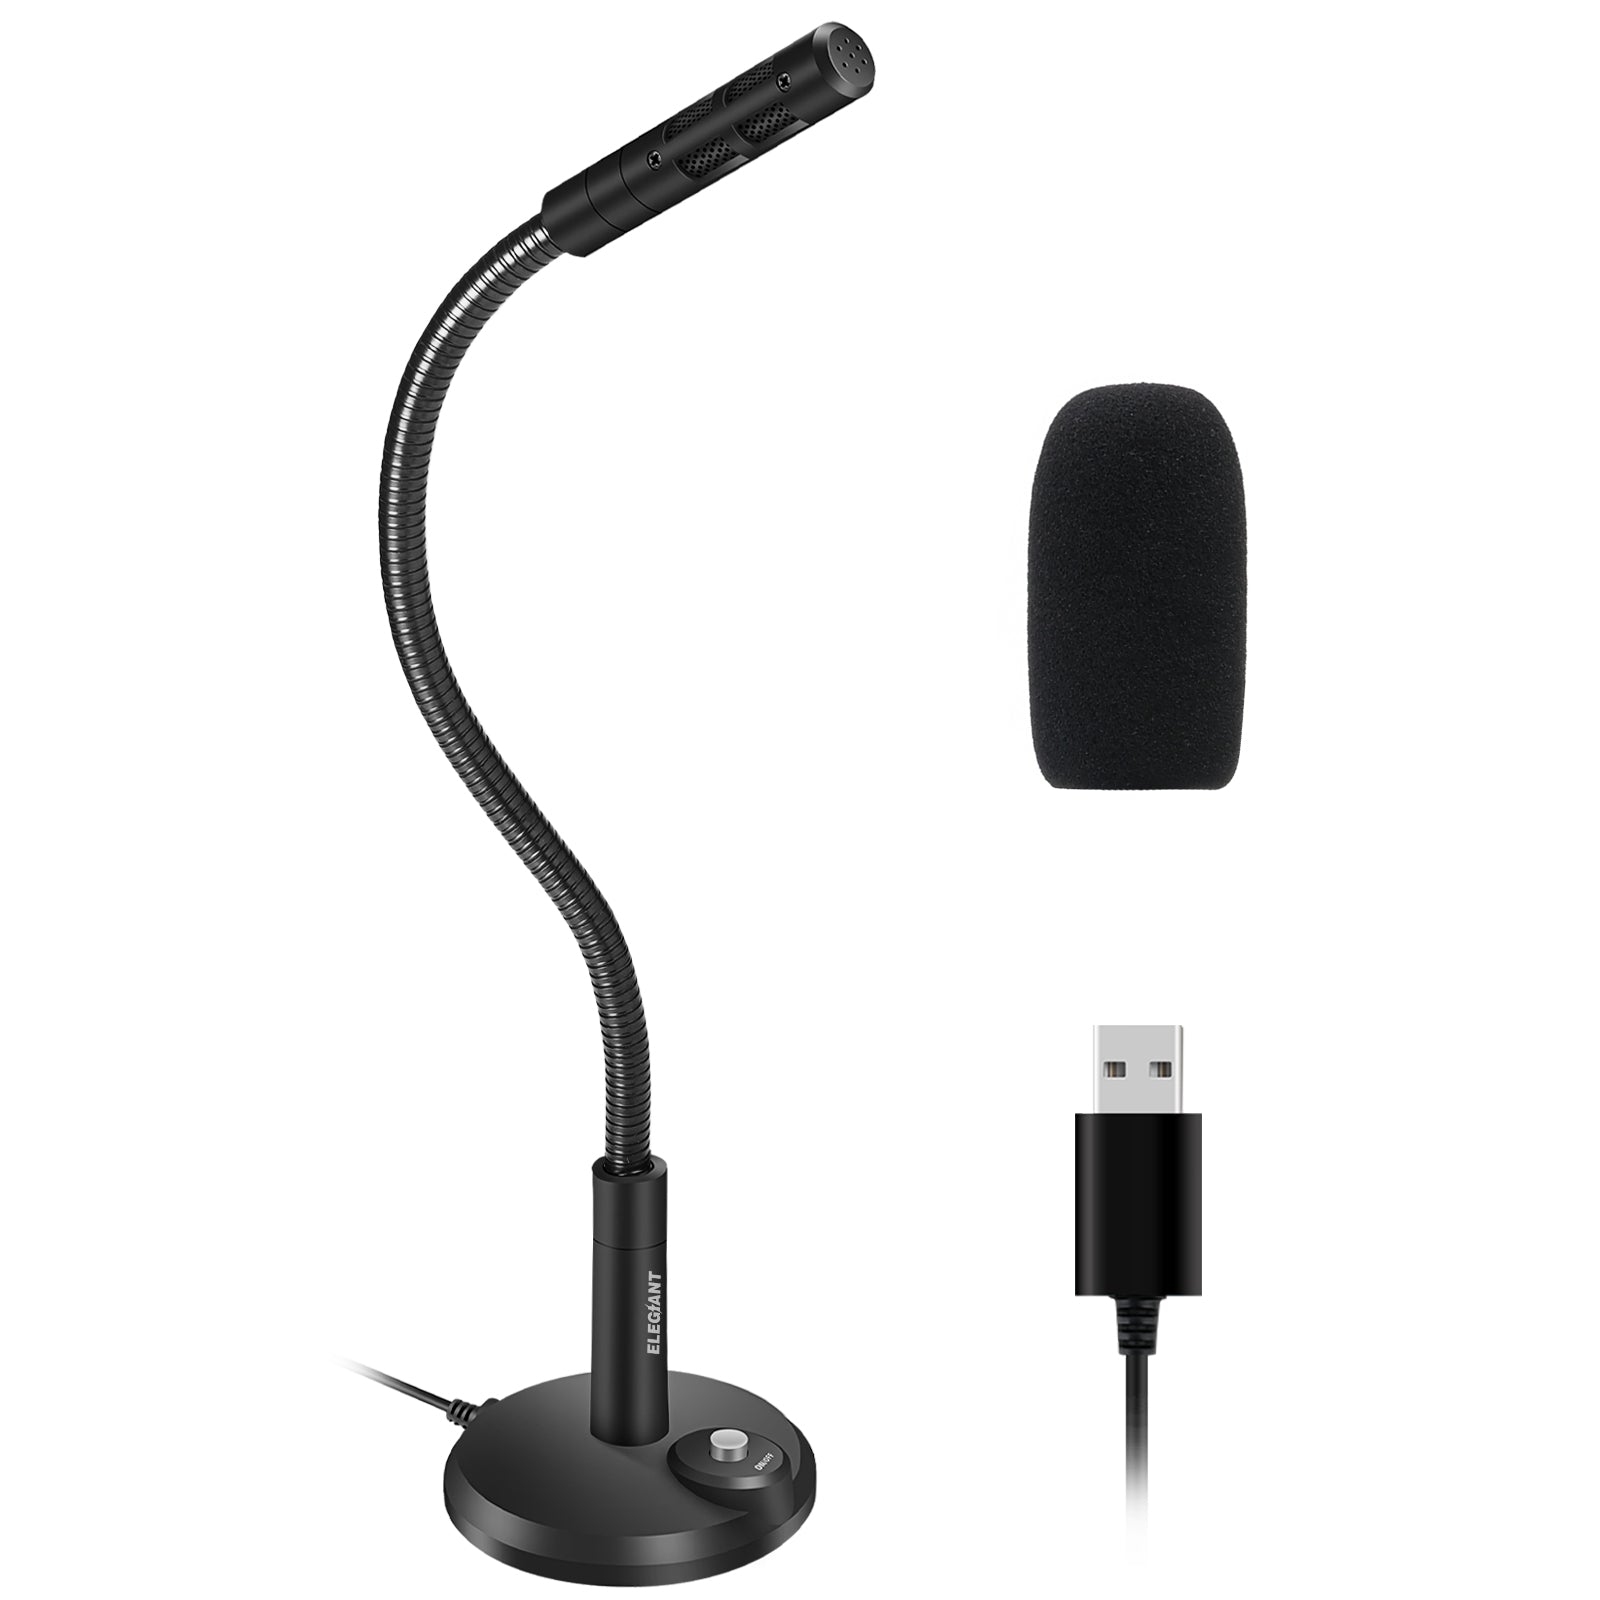 ELEGIANT EGM-01 USB Stand Microphone Mini Condenser Microphone with Switch for Mac Windows 7 8 10 and PC